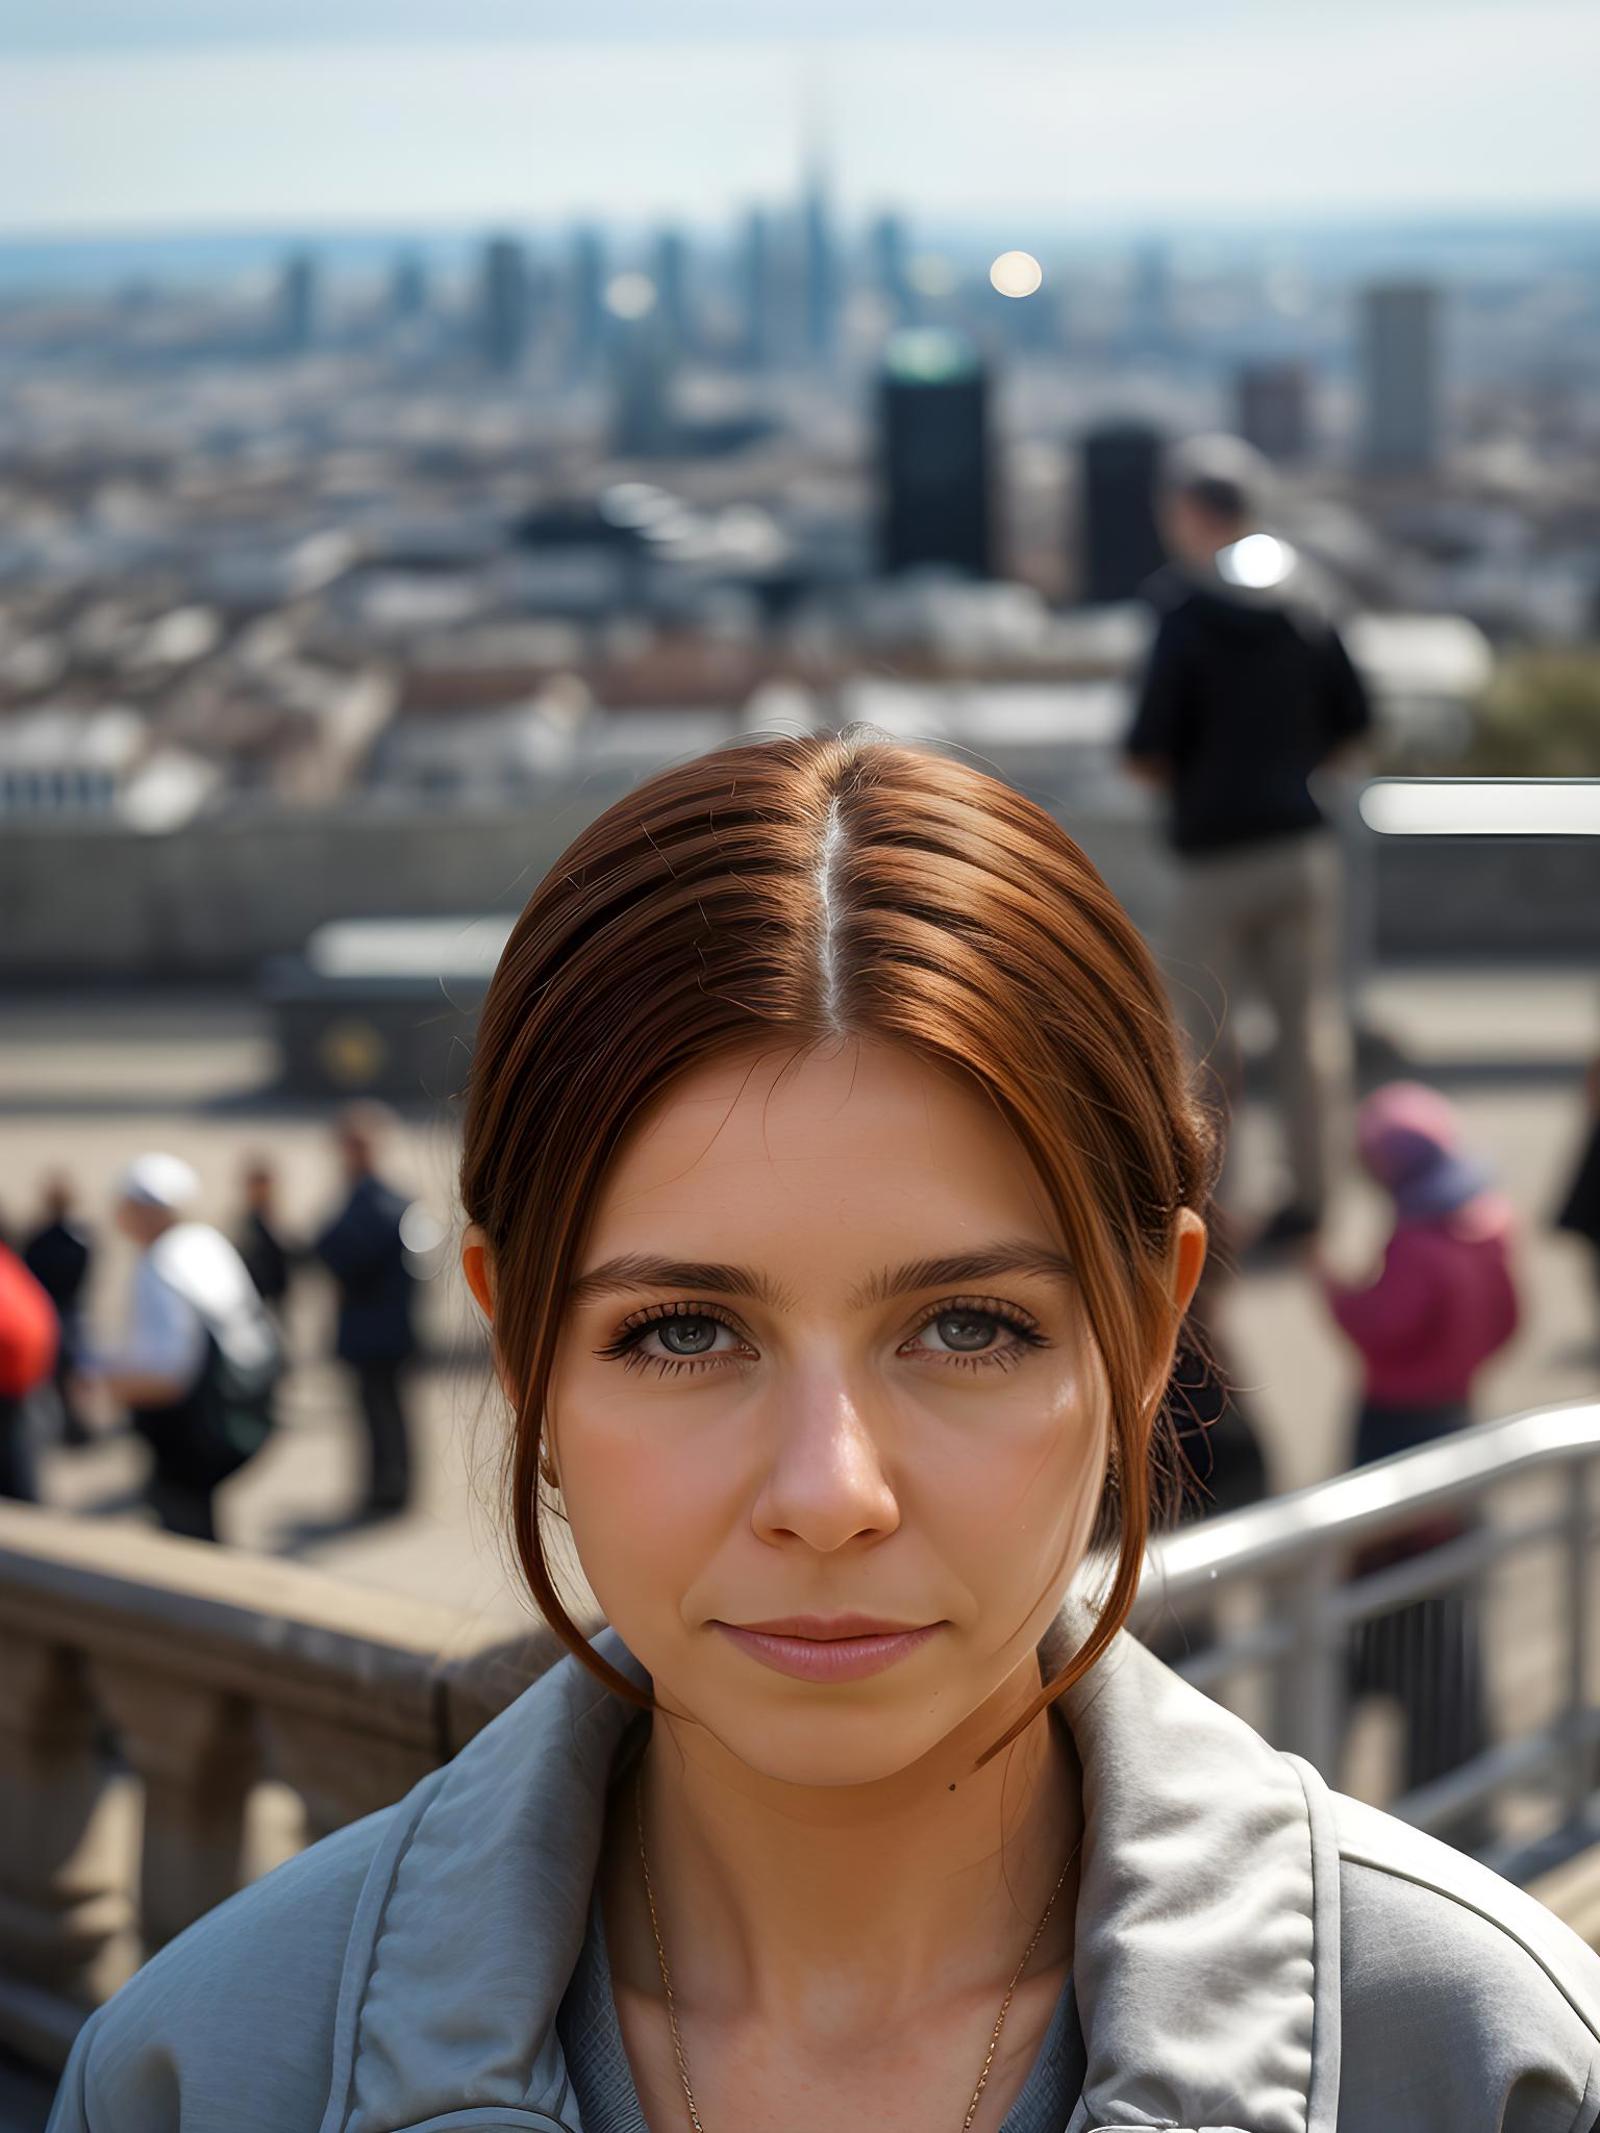 Stacey Dooley image by fraggle